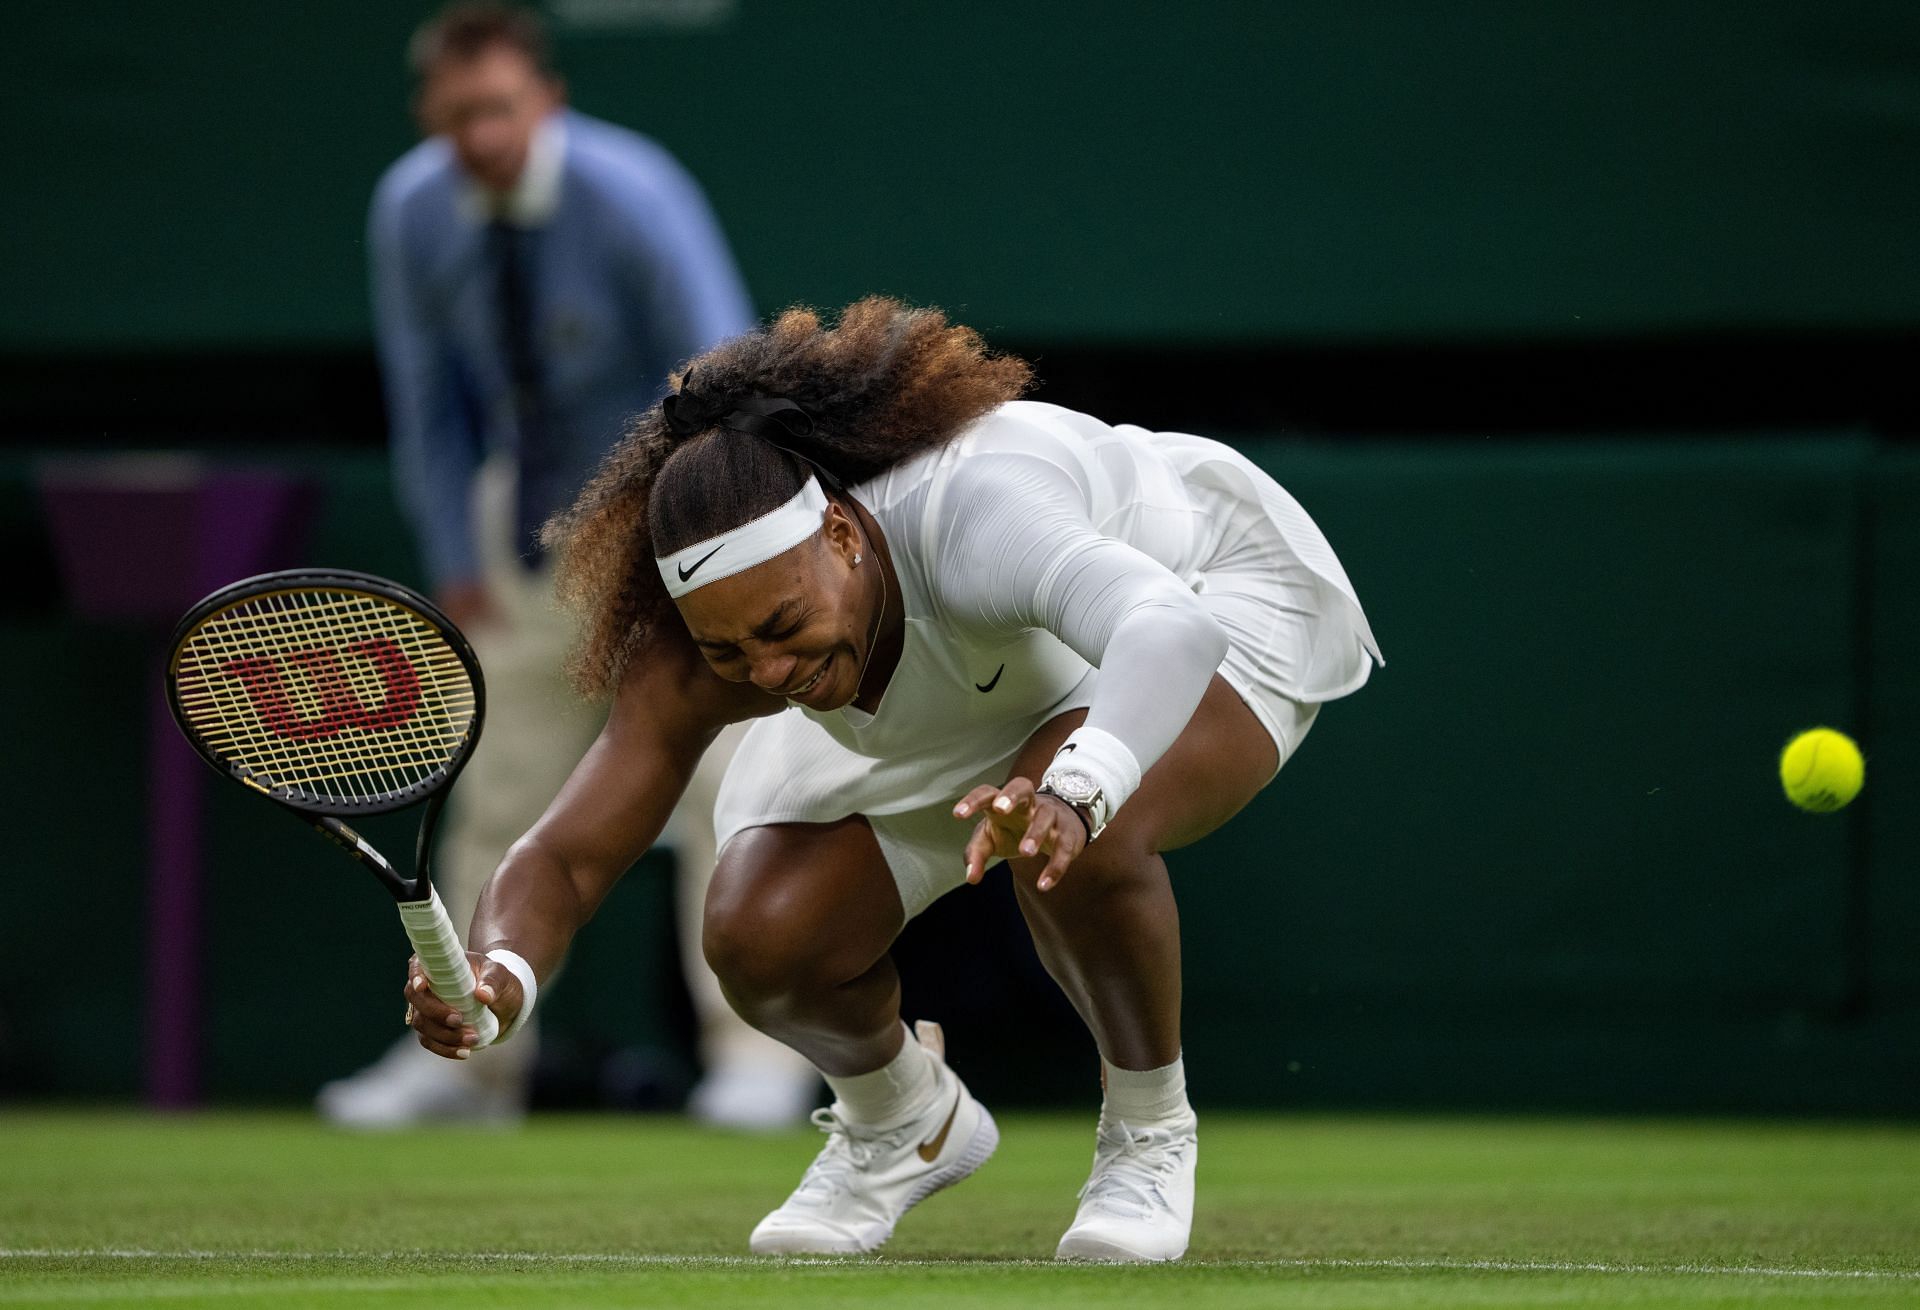 Williams on Day Two: The Championships - Wimbledon 2021